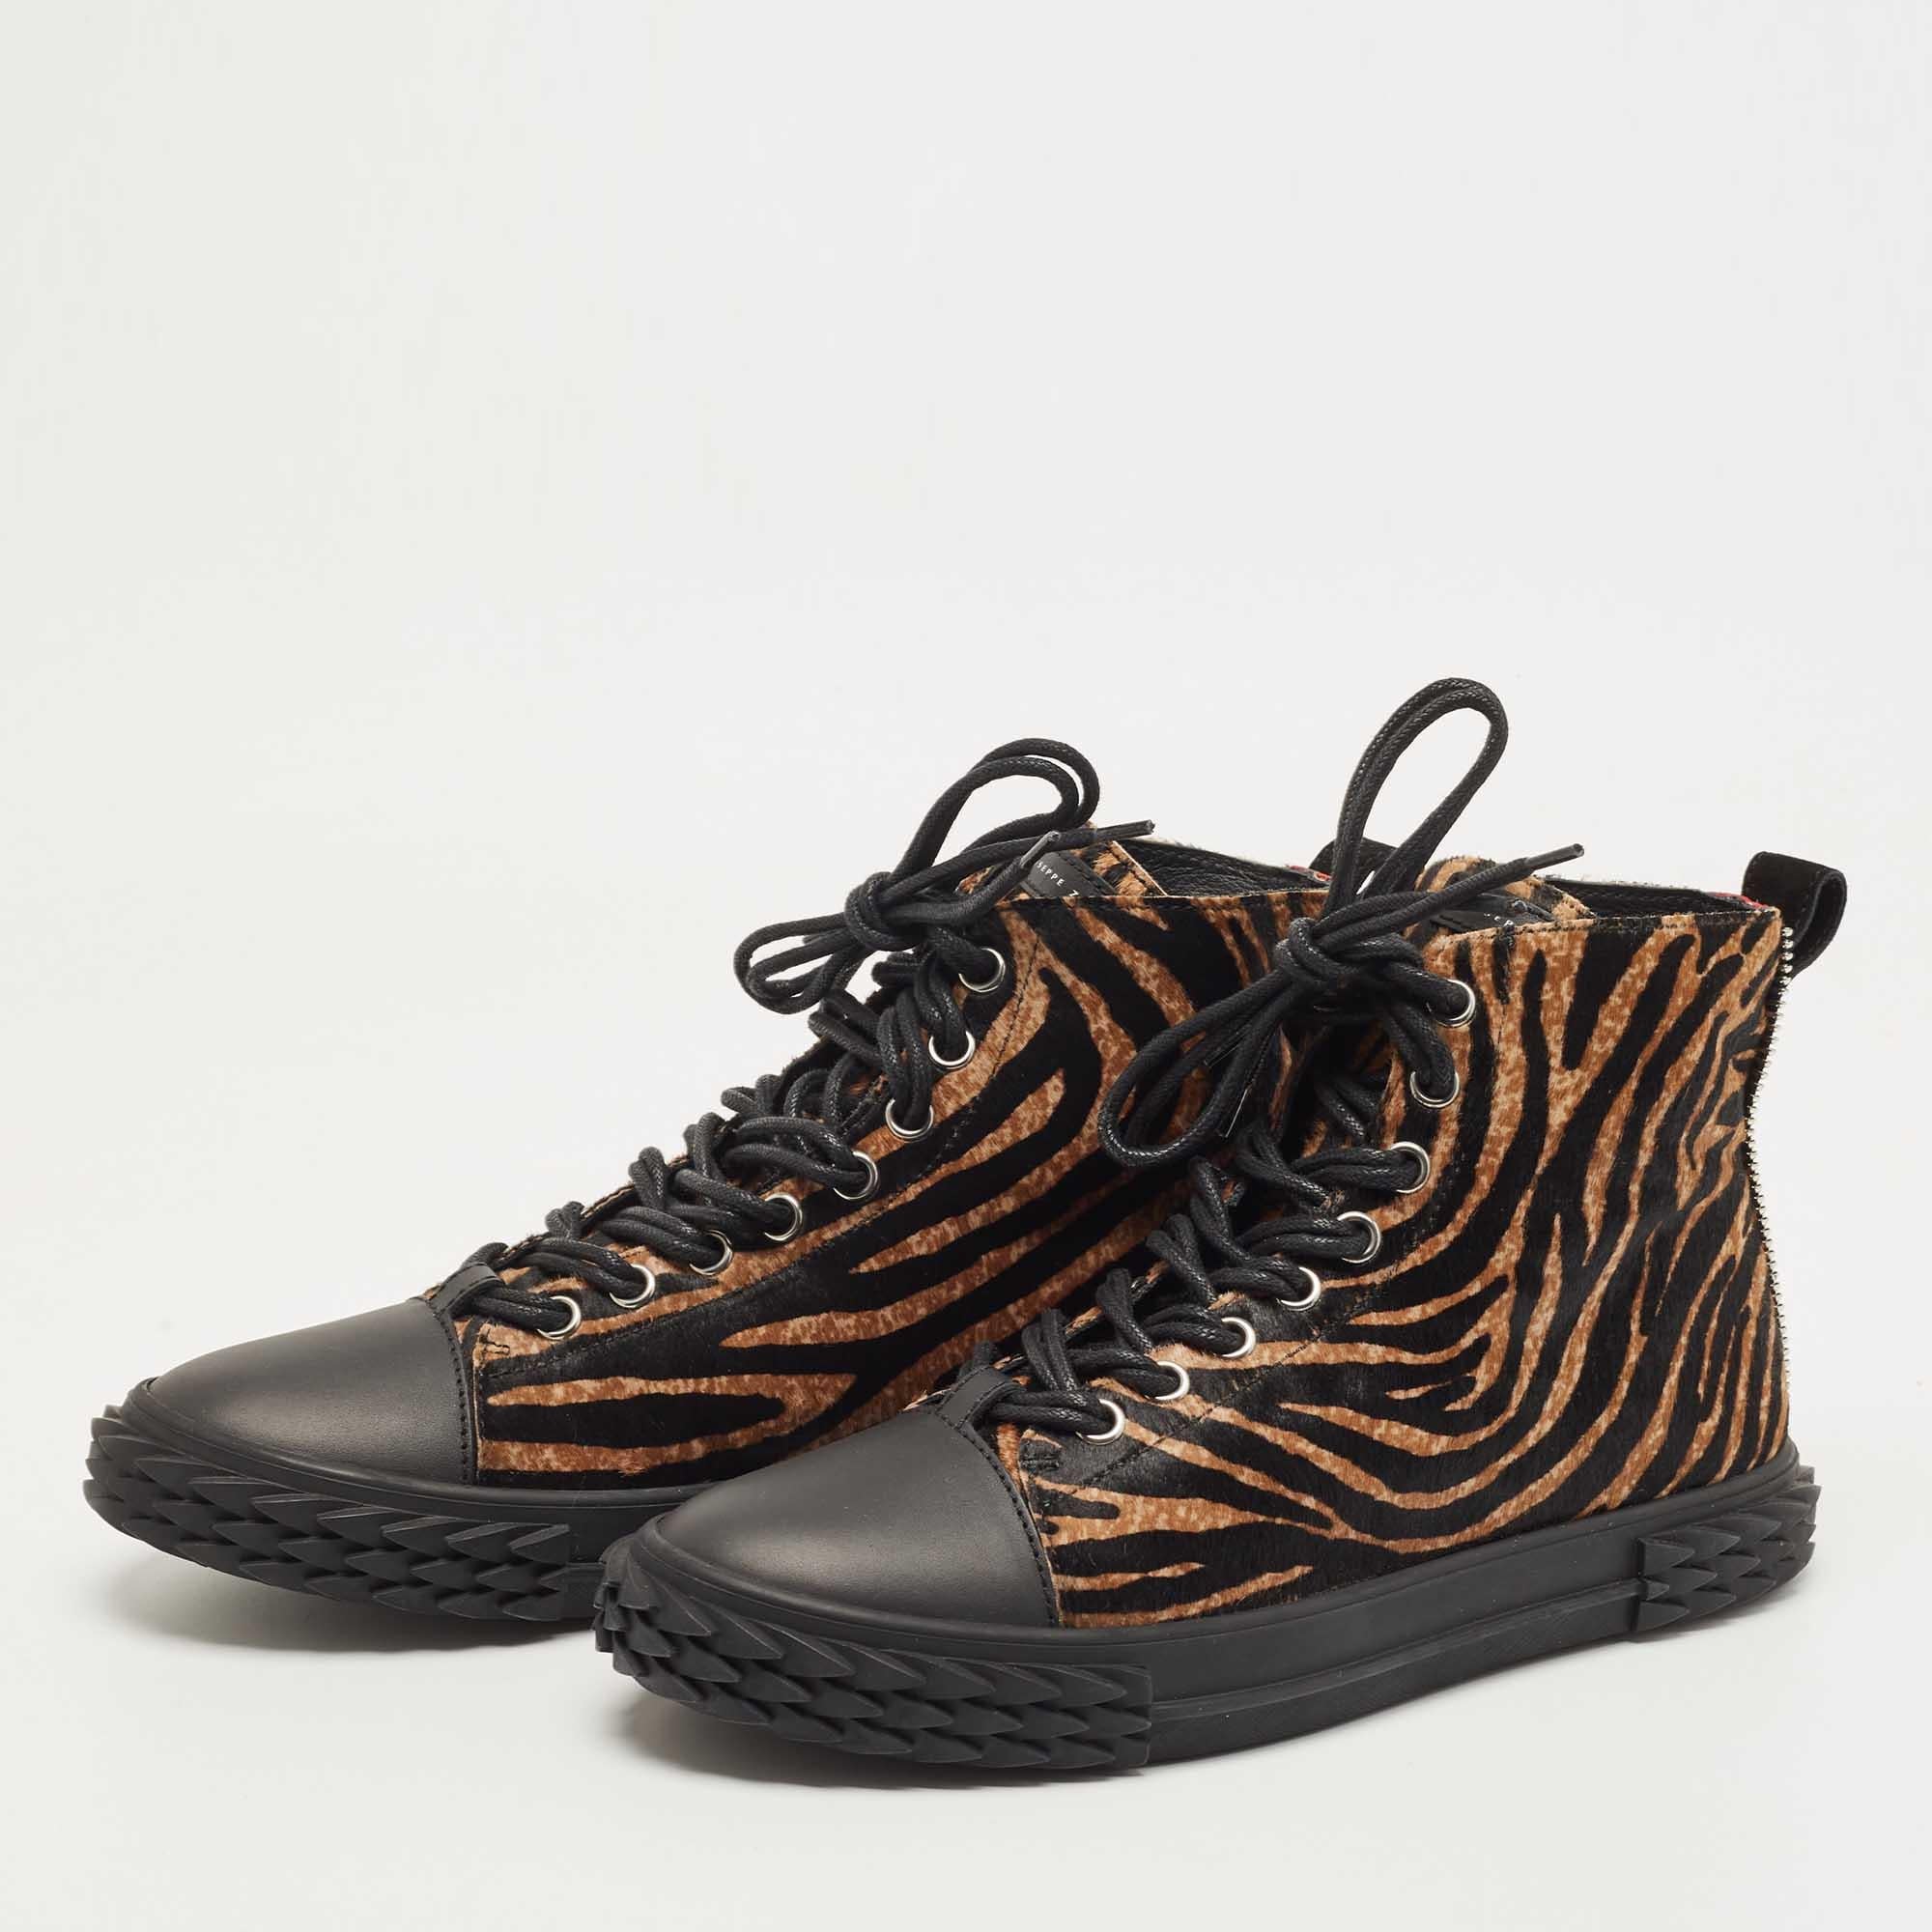 Add a statement appeal to your outfit with these Giuseppe Zanotti sneakers. Made from premium materials, they feature lace-up vamps and relaxing footbeds. The rubber sole of this pair aims to provide you with everyday ease.

